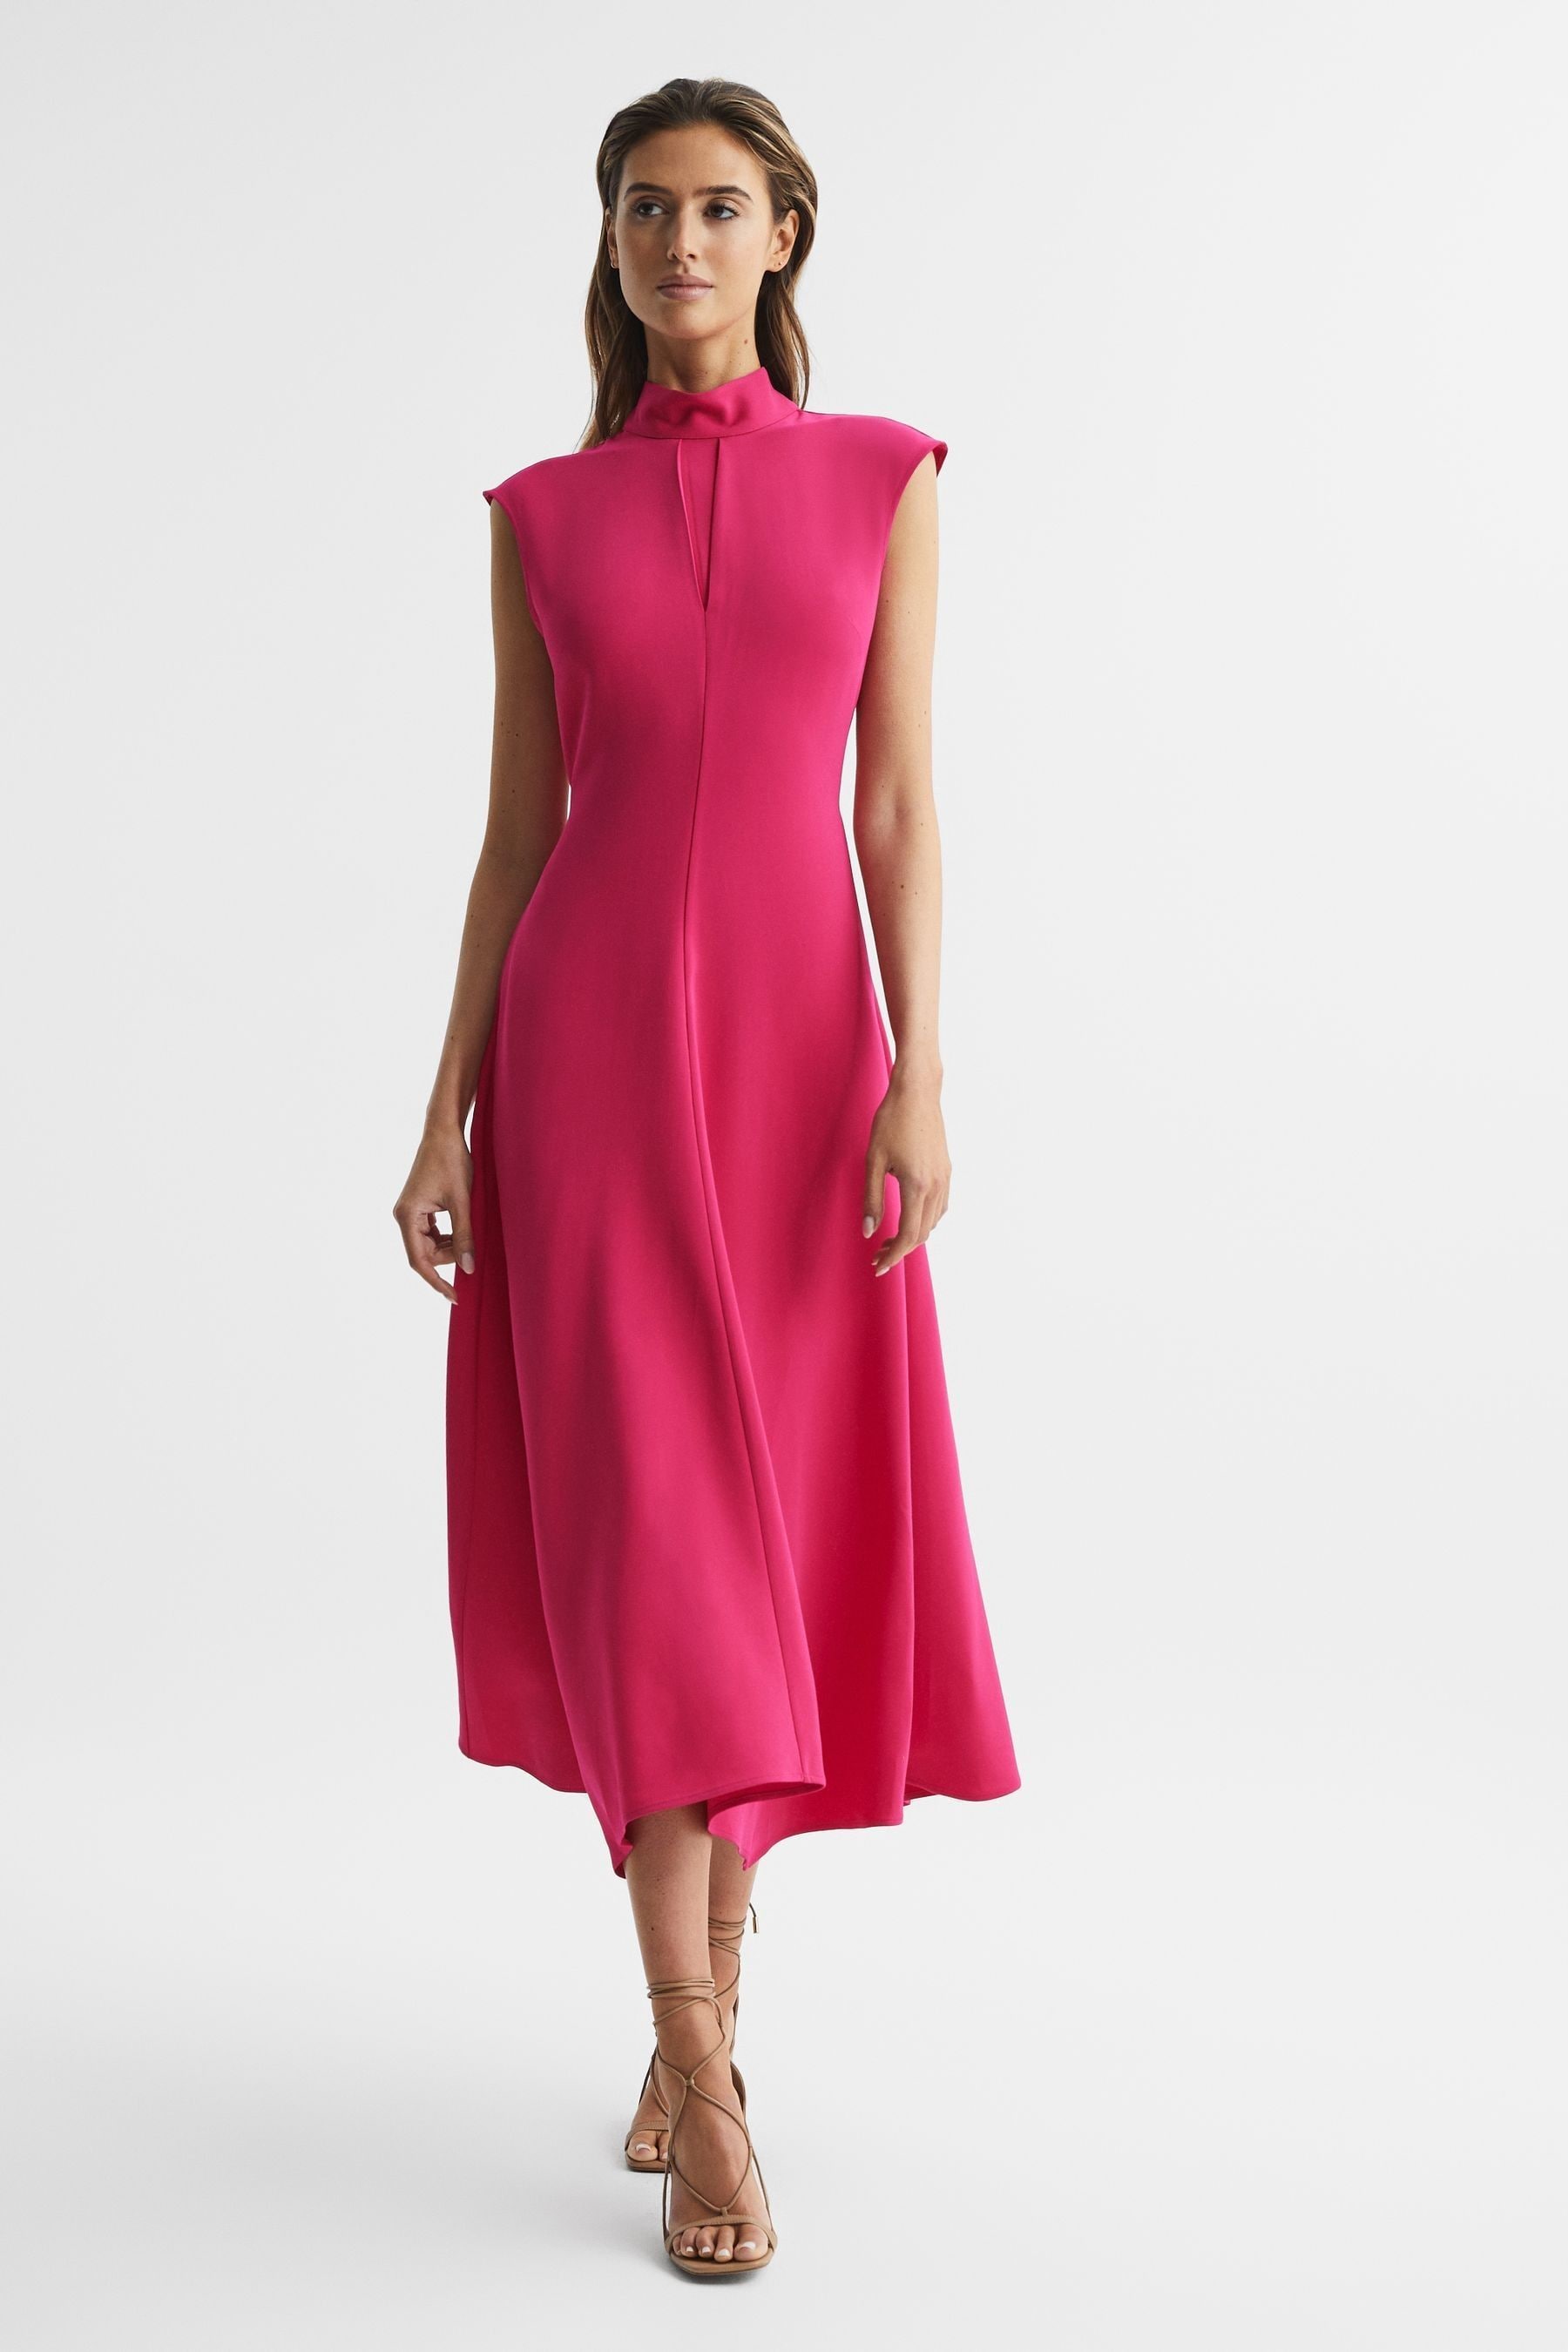 Reiss Livvy In Bright Pink